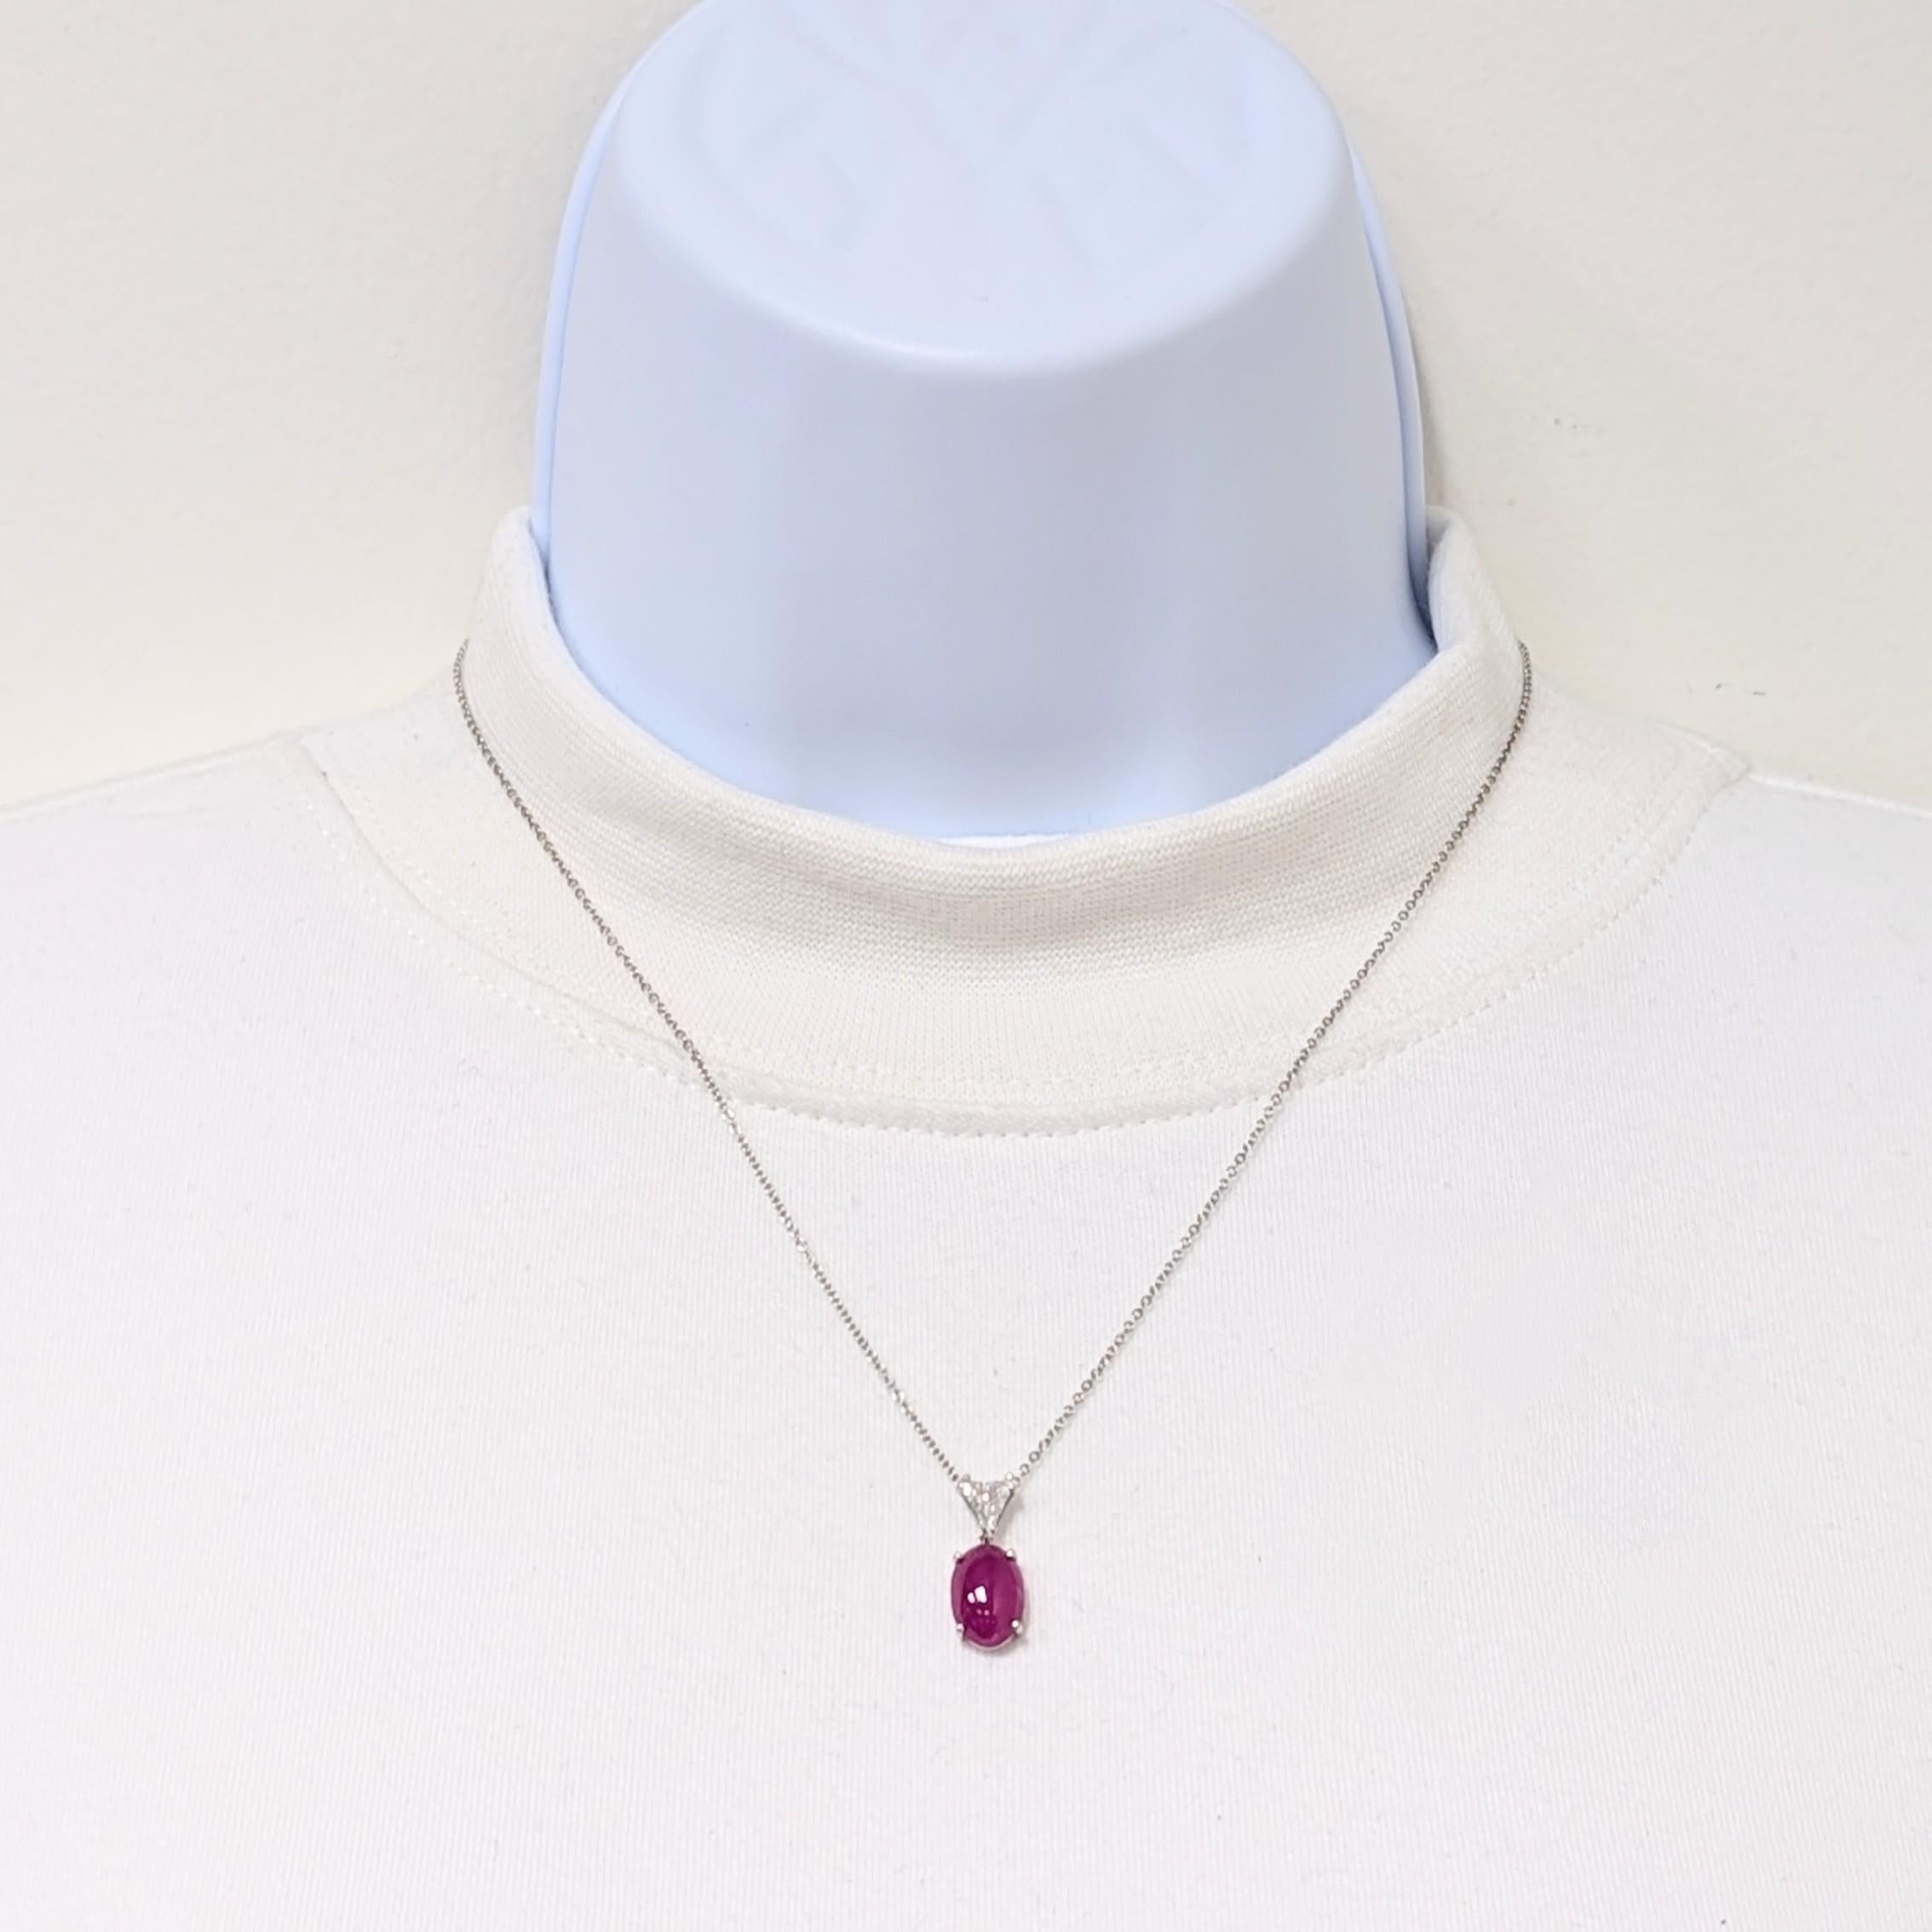 Gorgeous GIA 4.43 ct. purplish red ruby oval cabochon with 0.35 ct. good quality white diamond trillion.  Handmade in platinum.  Length is 18